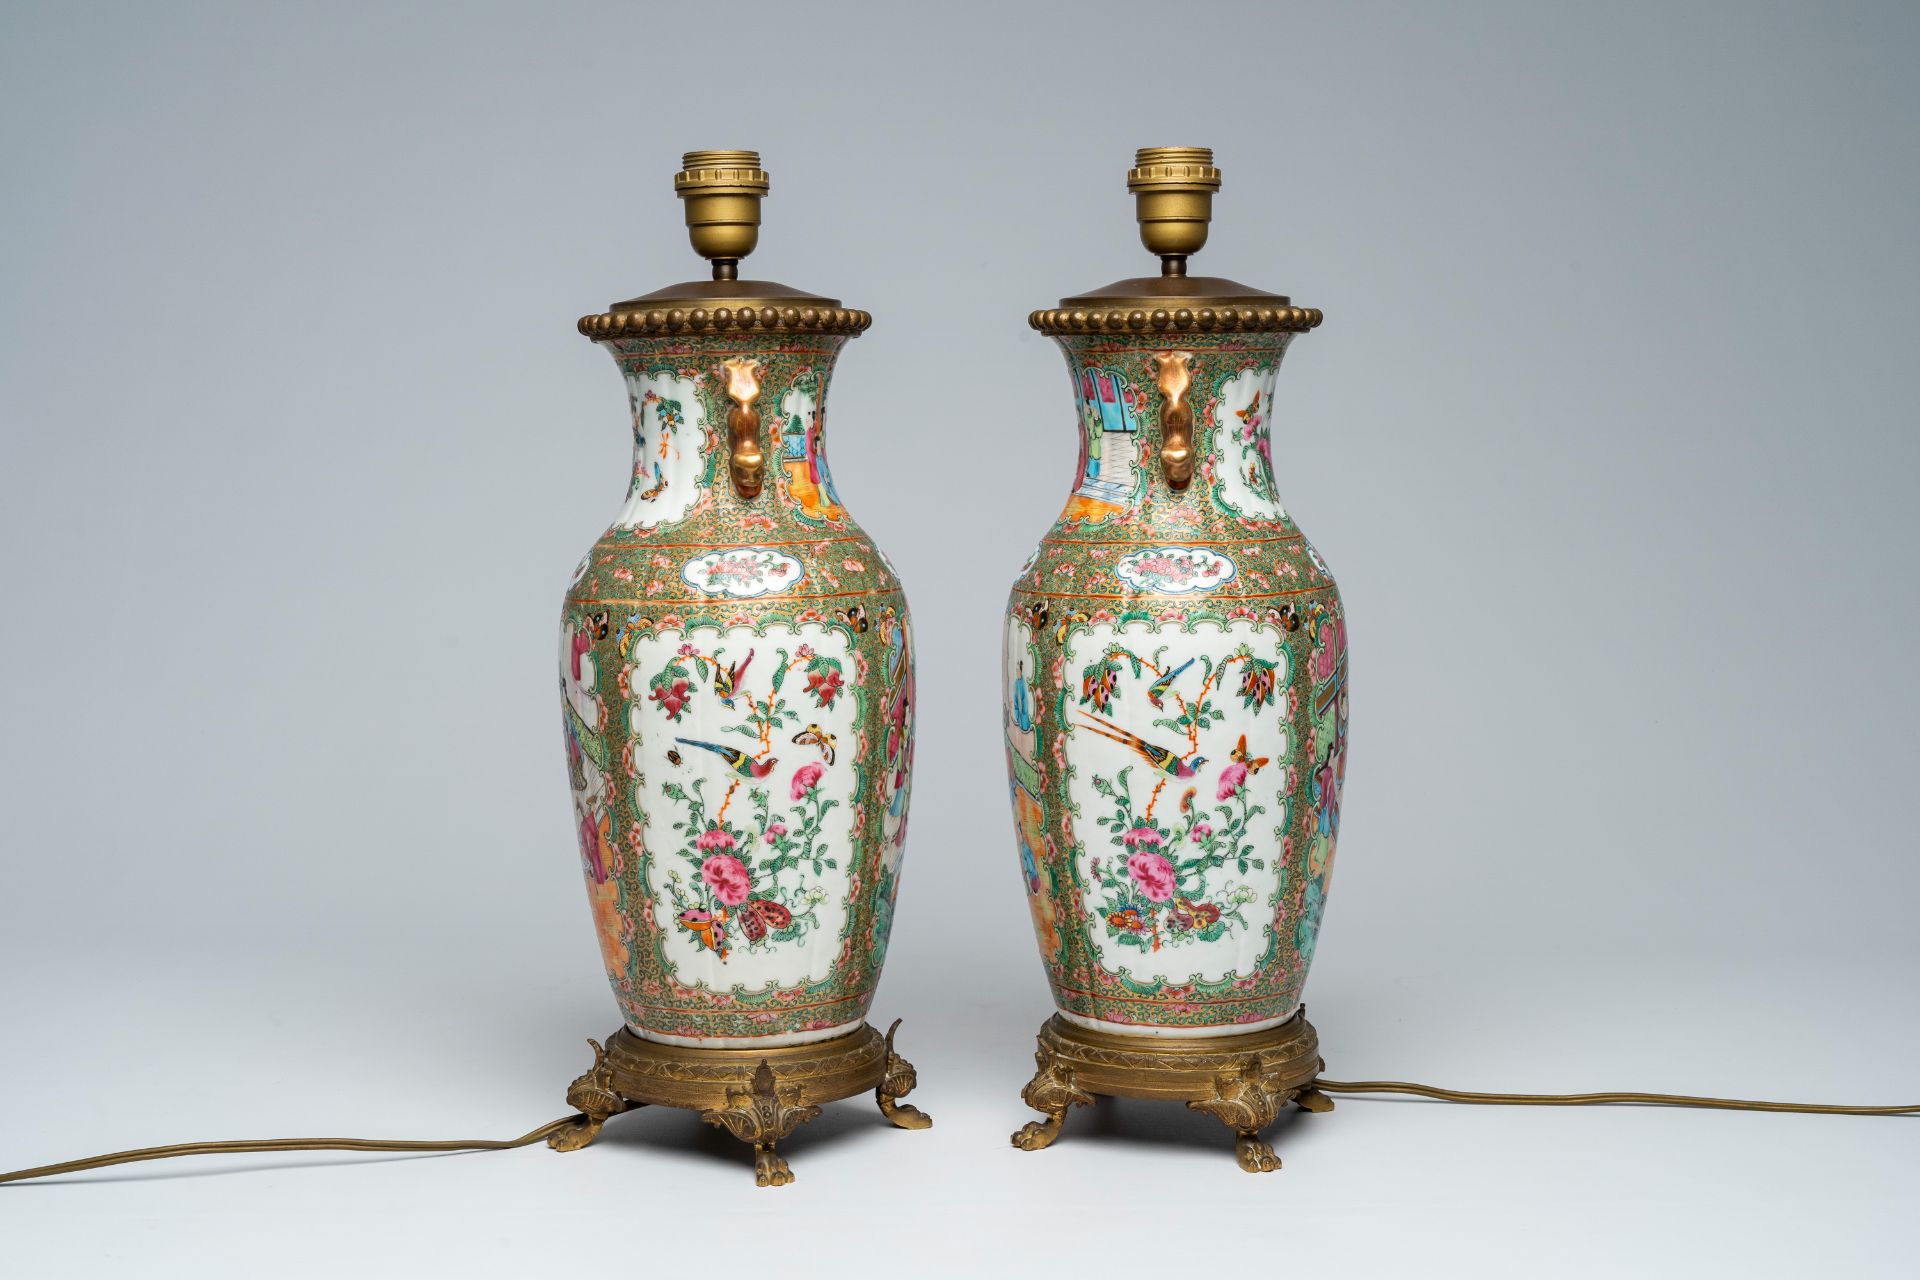 A pair of Chinese Canton famille rose vases with palace scenes mounted as lamps, 19th C. - Image 3 of 7